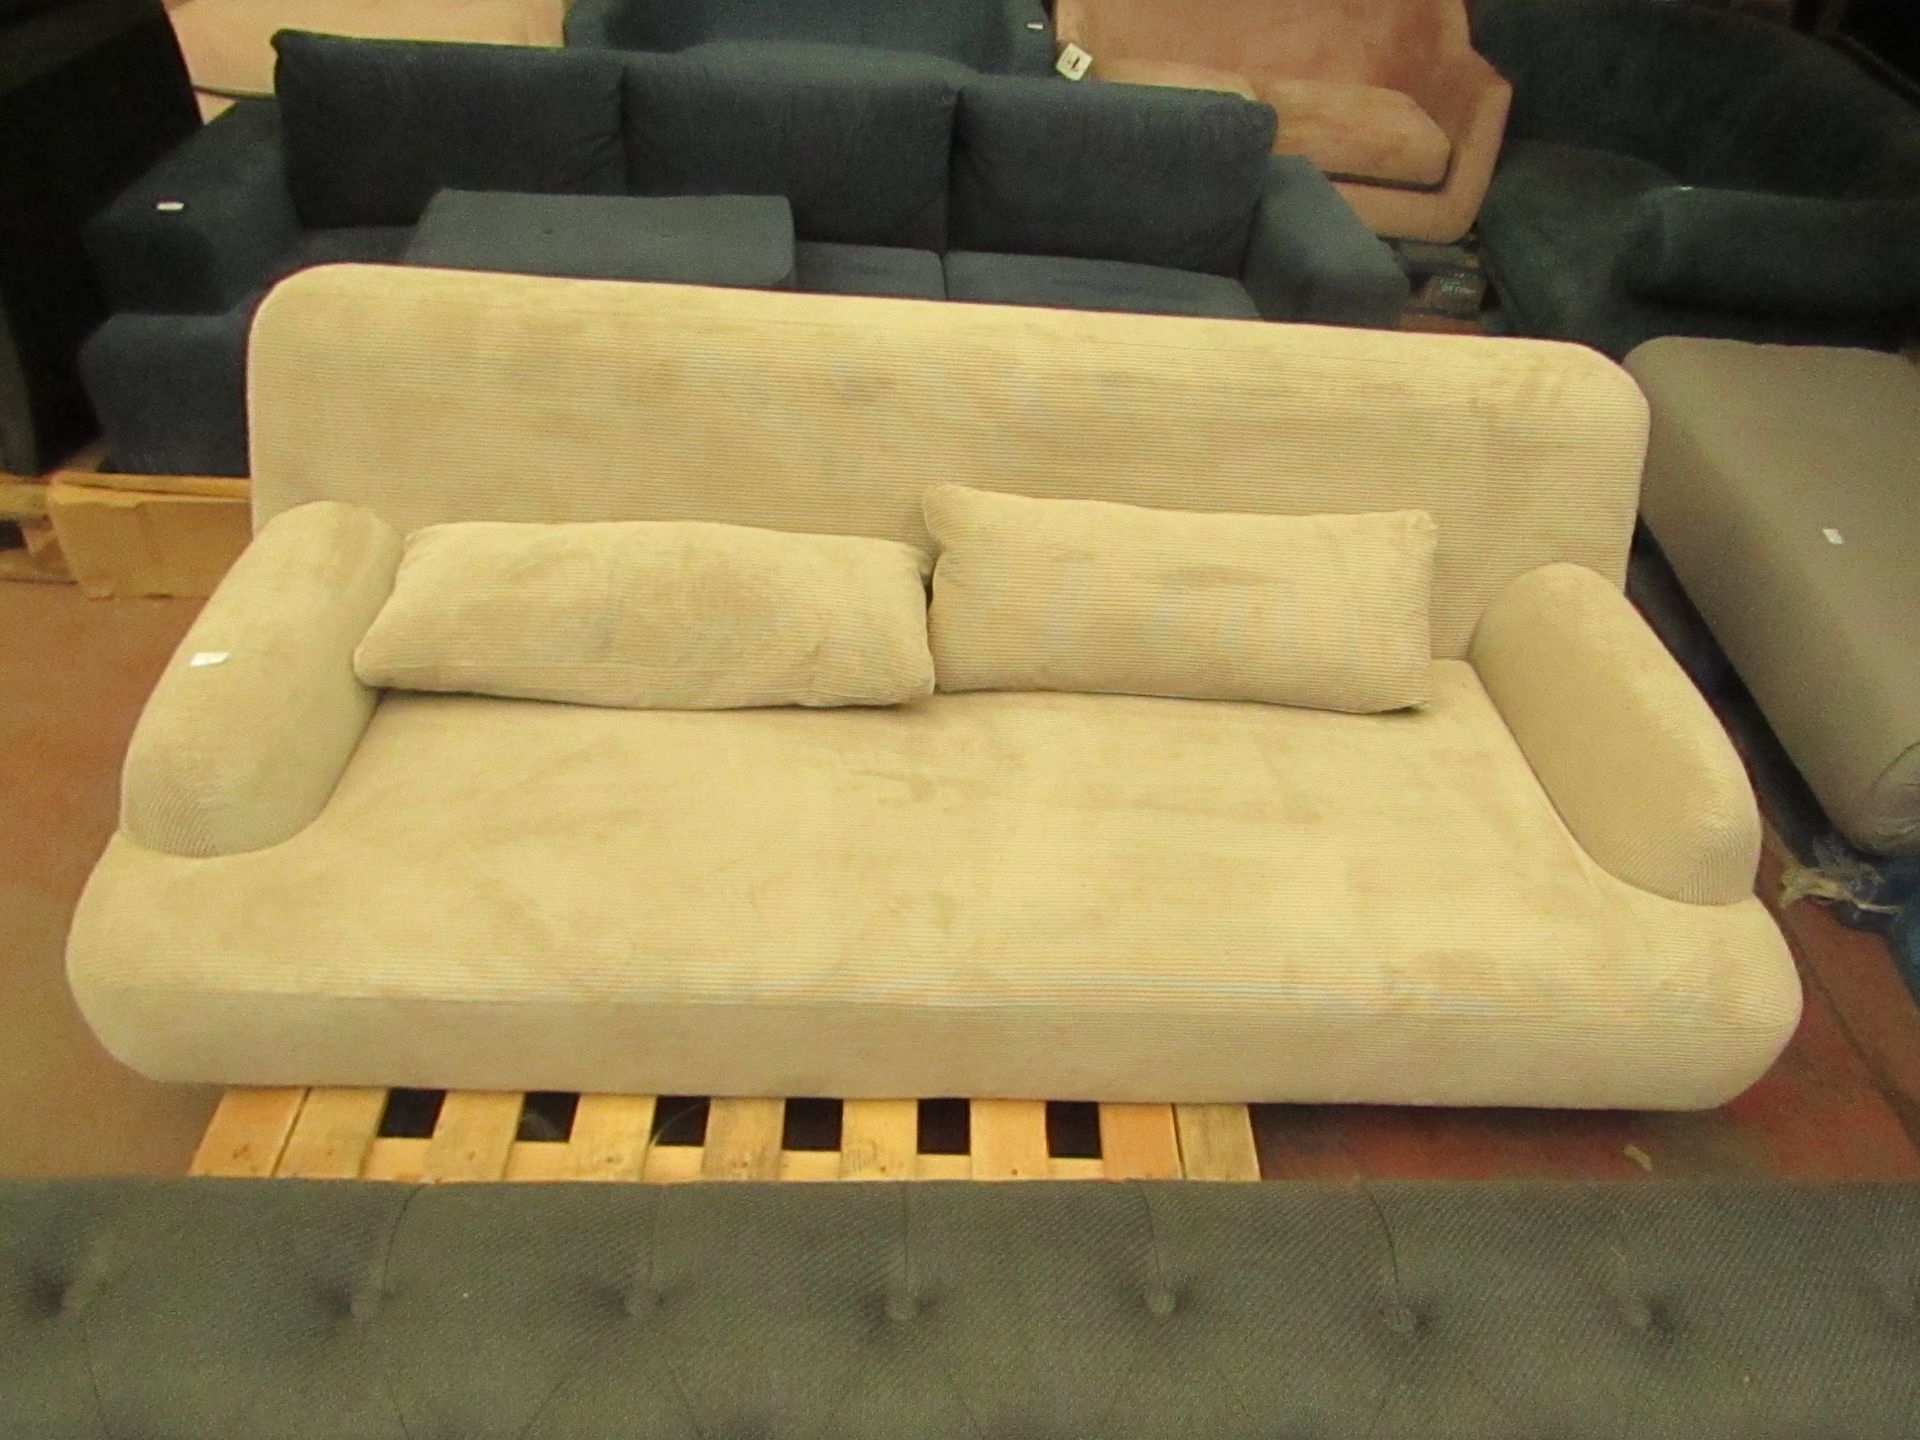 | 1X | MADE.COM 2 SEATER FABRIC SOFA | NO MAJOR DAMAGE (PLEASE NOTE, THIS DOES NOT PROVIDE ANY